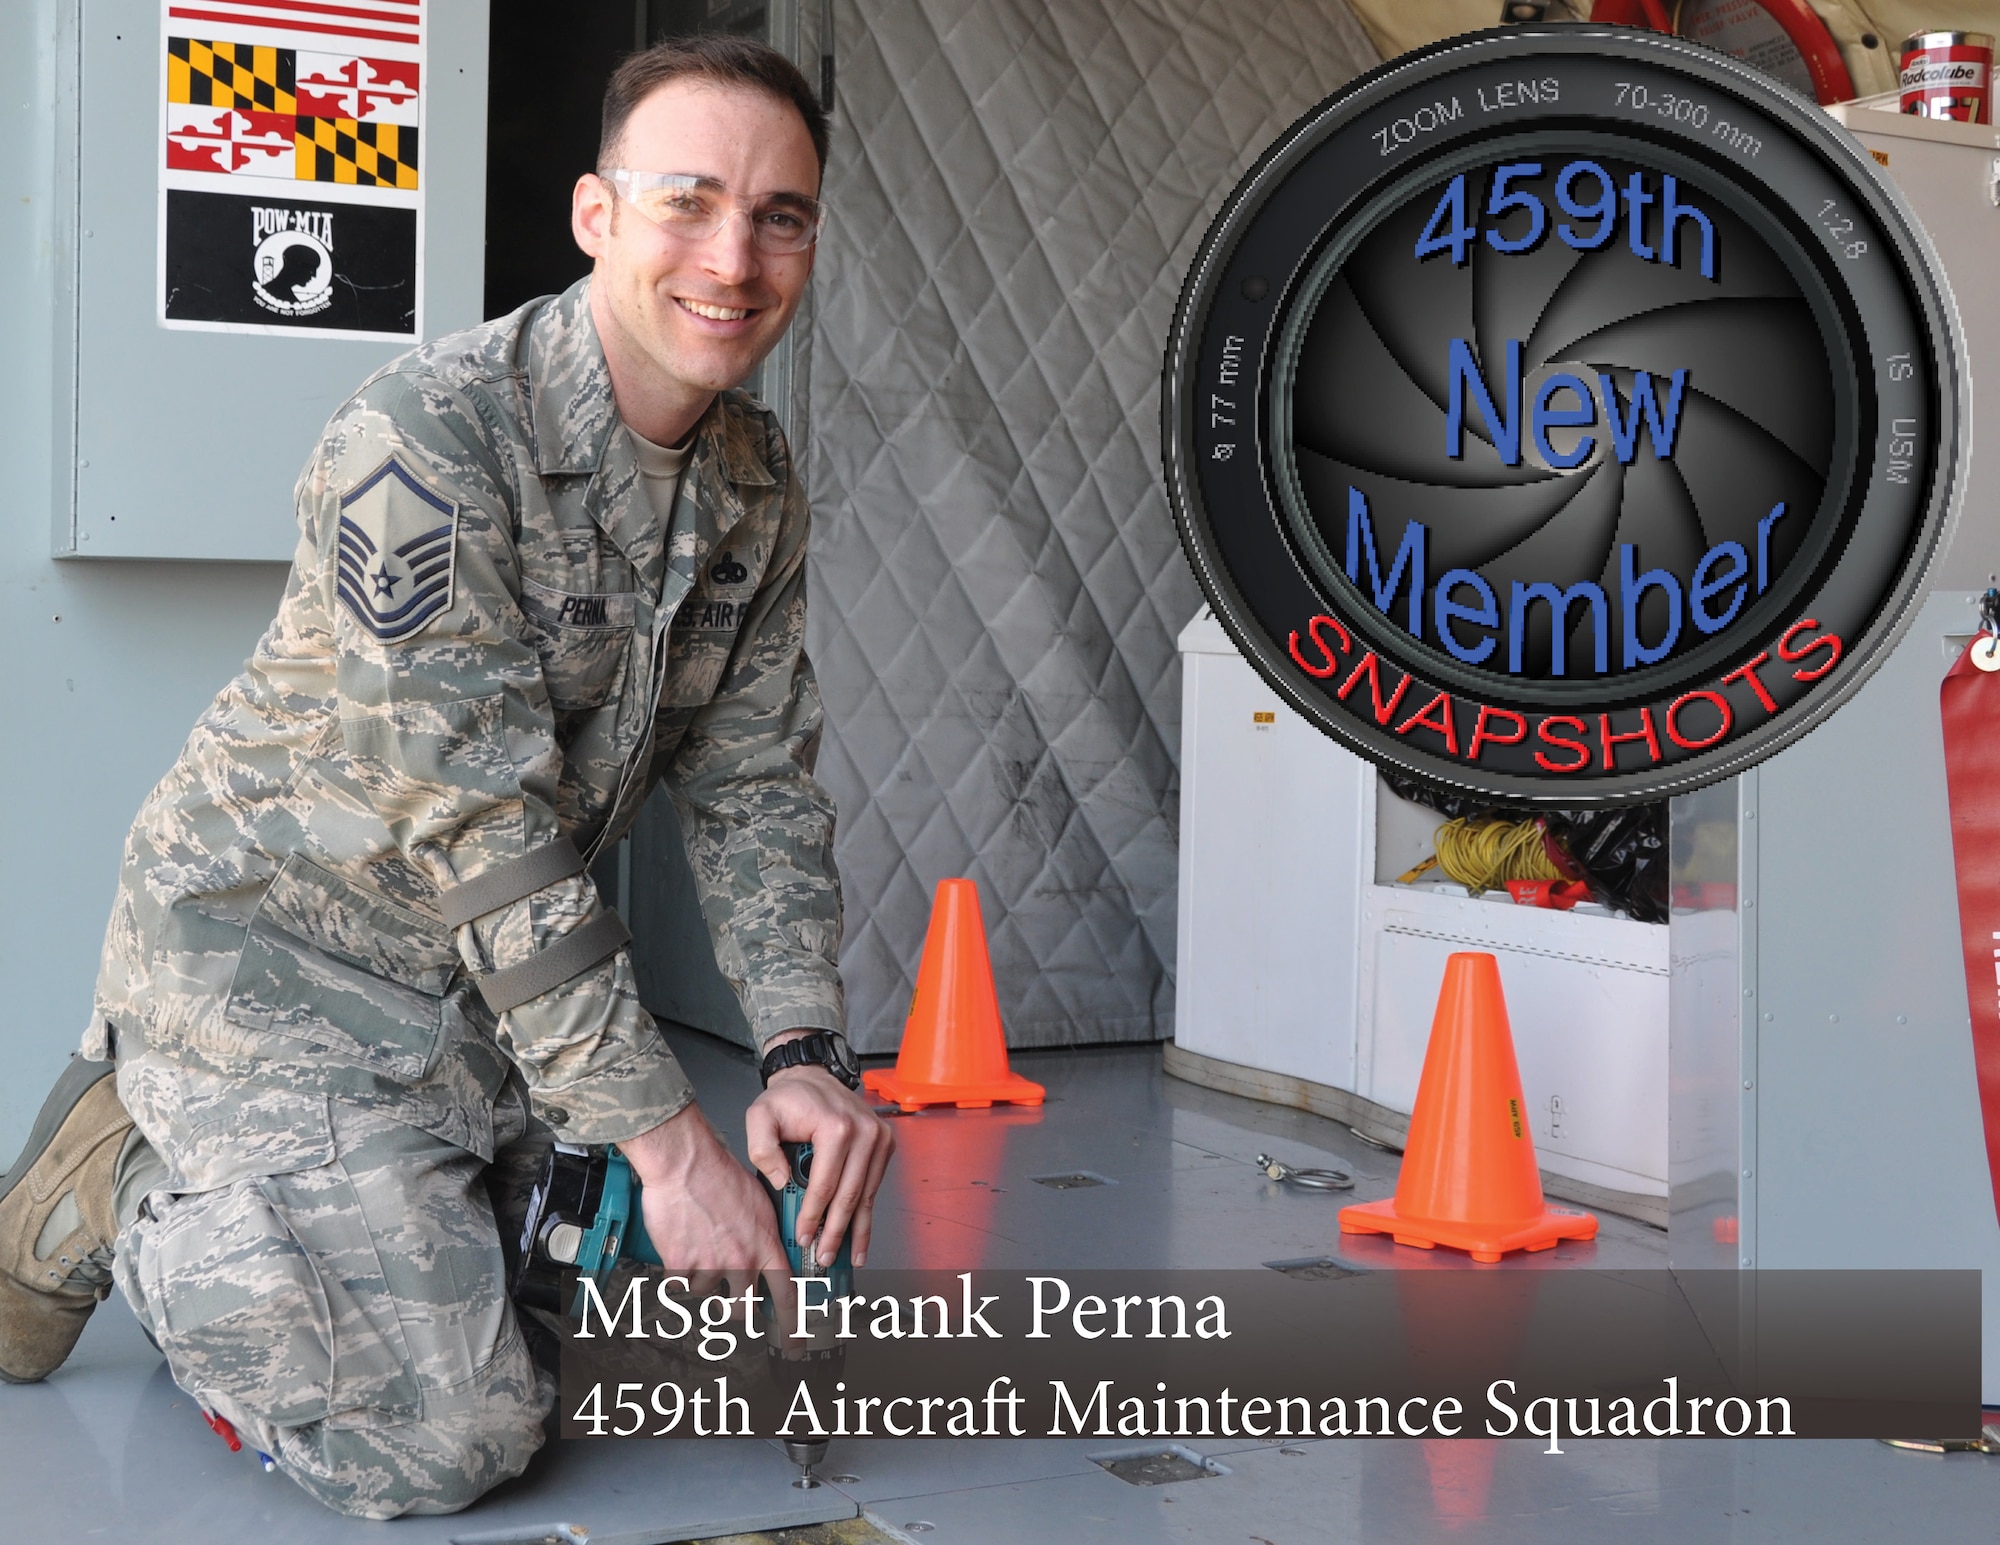 Master Sgt. Frank Perna, Crew Chief, 459th Aircraft Maintenance Squadron poses for a photo at Joint Base Andrews, Md., May 5, 2015. MSgt Perna is the 459th Air Refueling Wing's New Member Snapshot for the month of March. (U.S. Air Force Photo/ Senior Airman Kristin Kurtz)